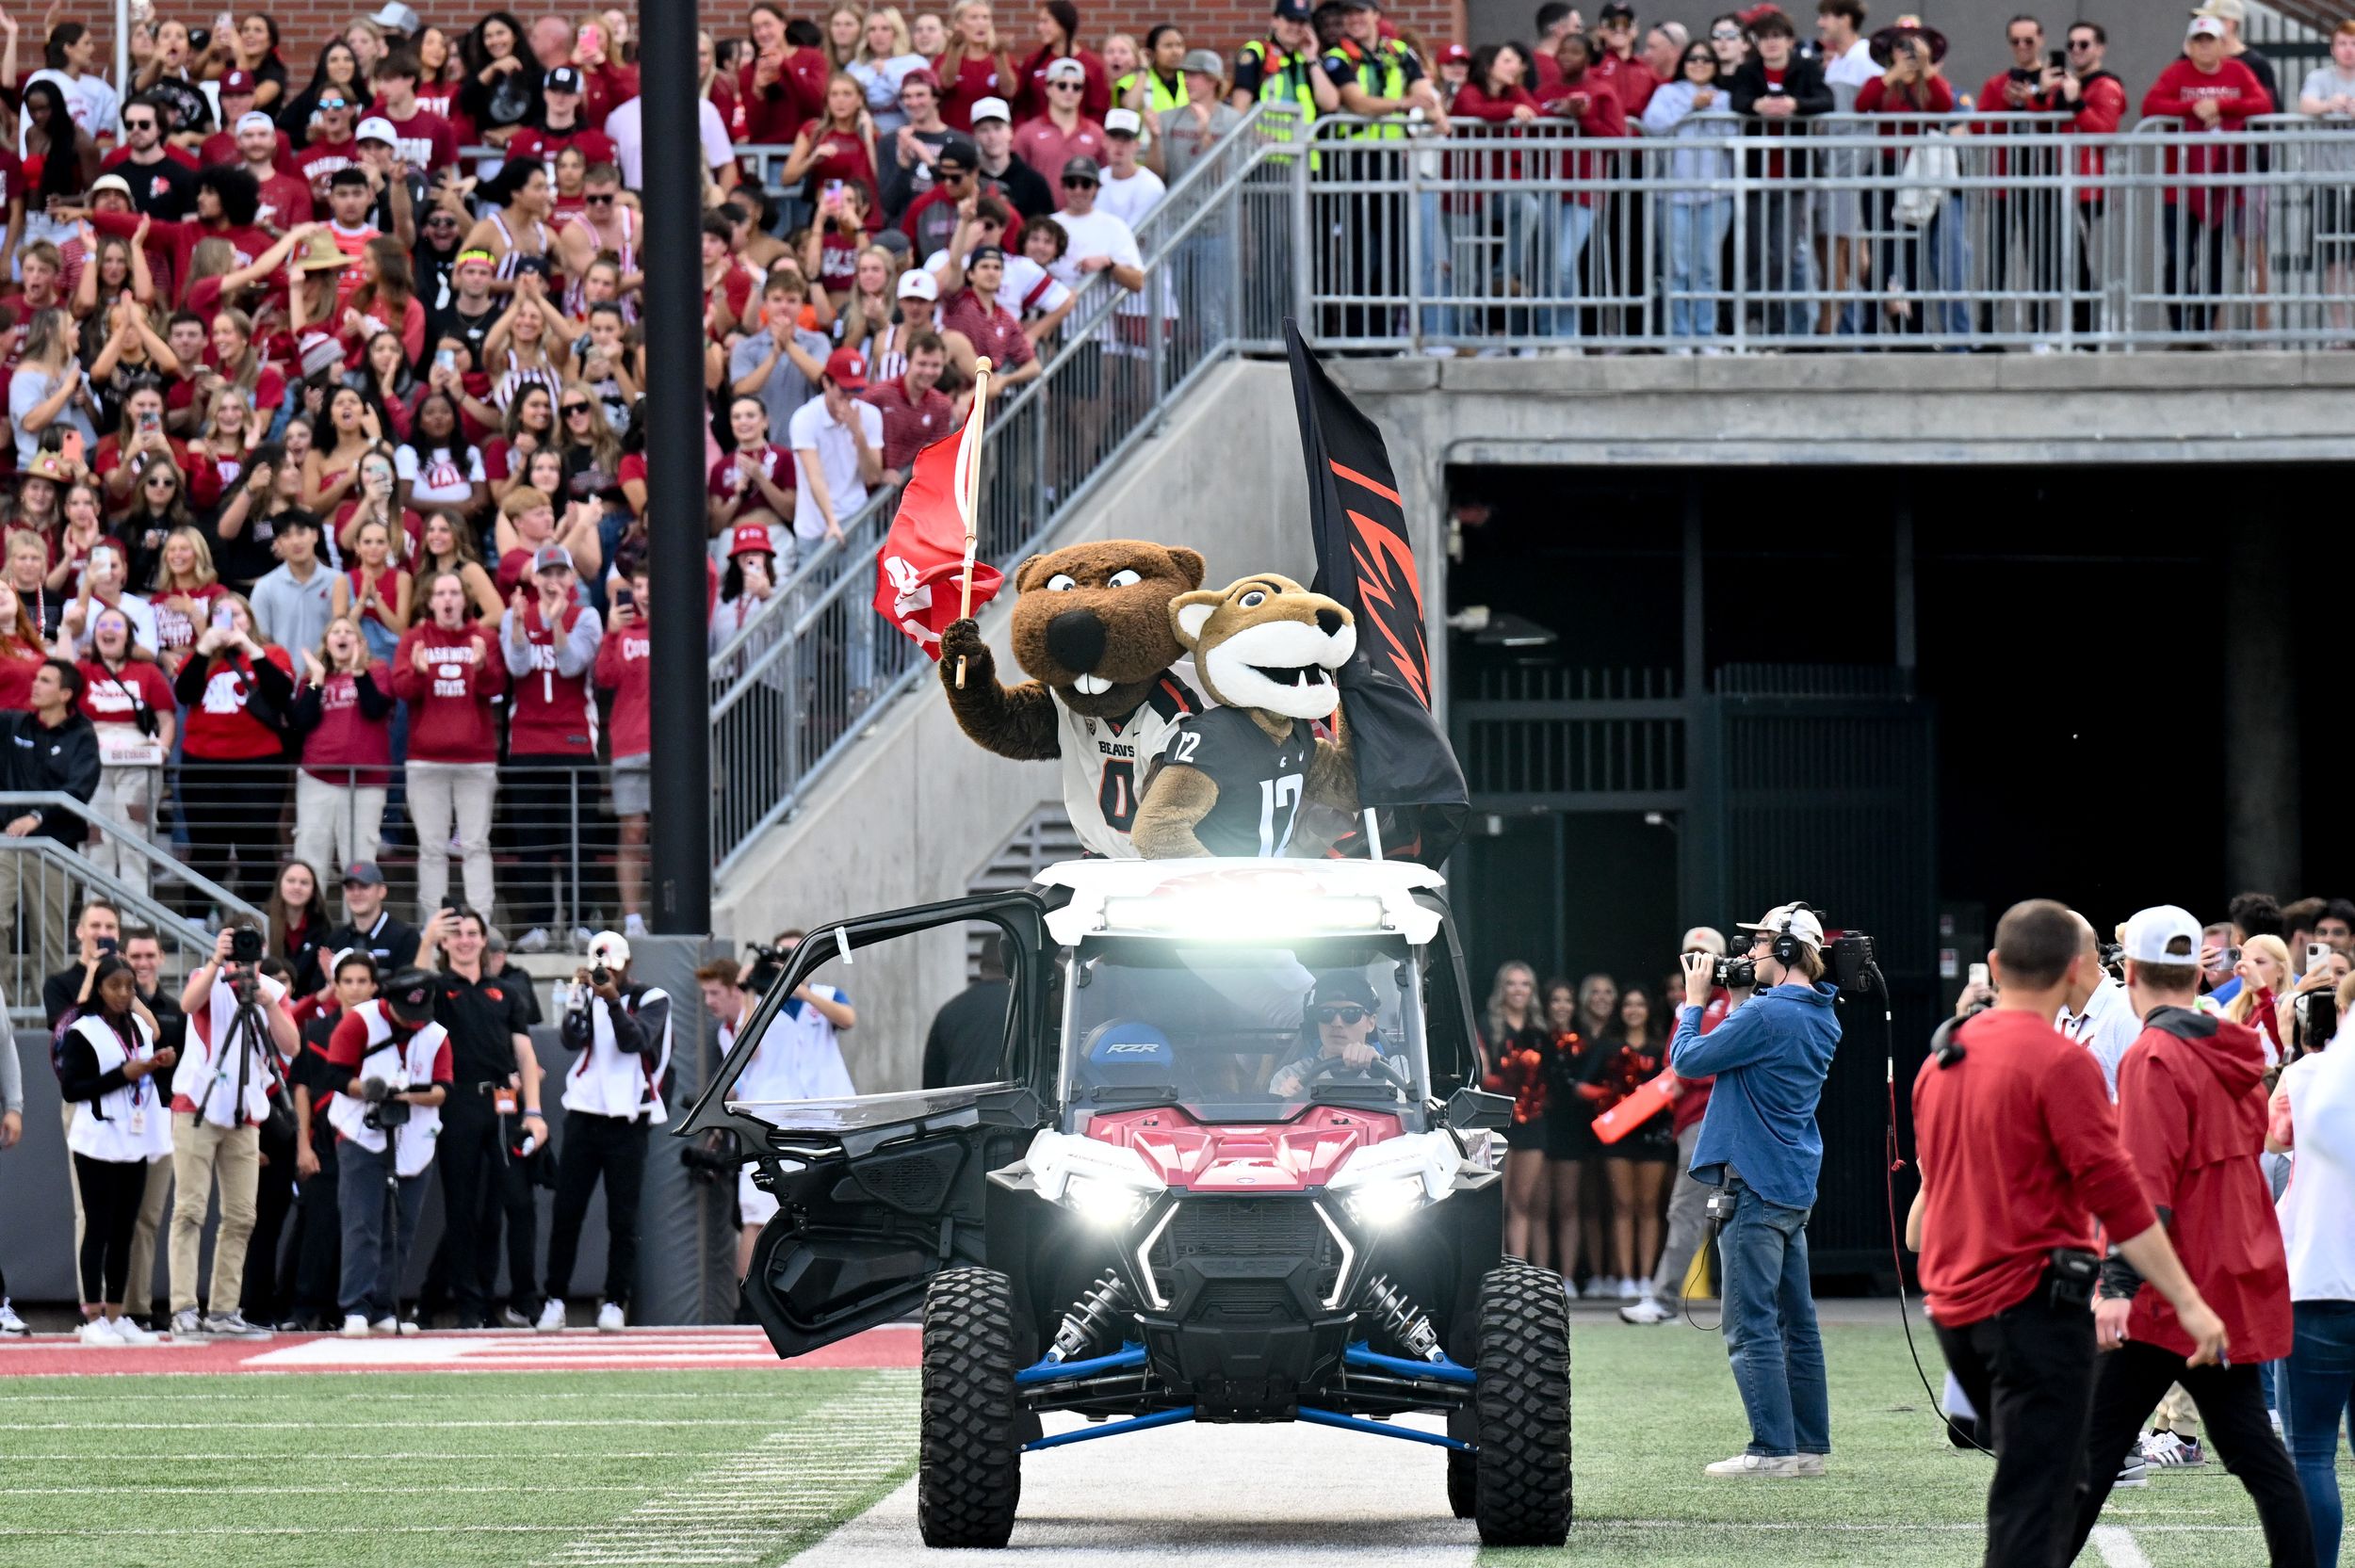 Cougar and Beaver mascots carry flags on the back of a 4x4 in the Cougars football stadium